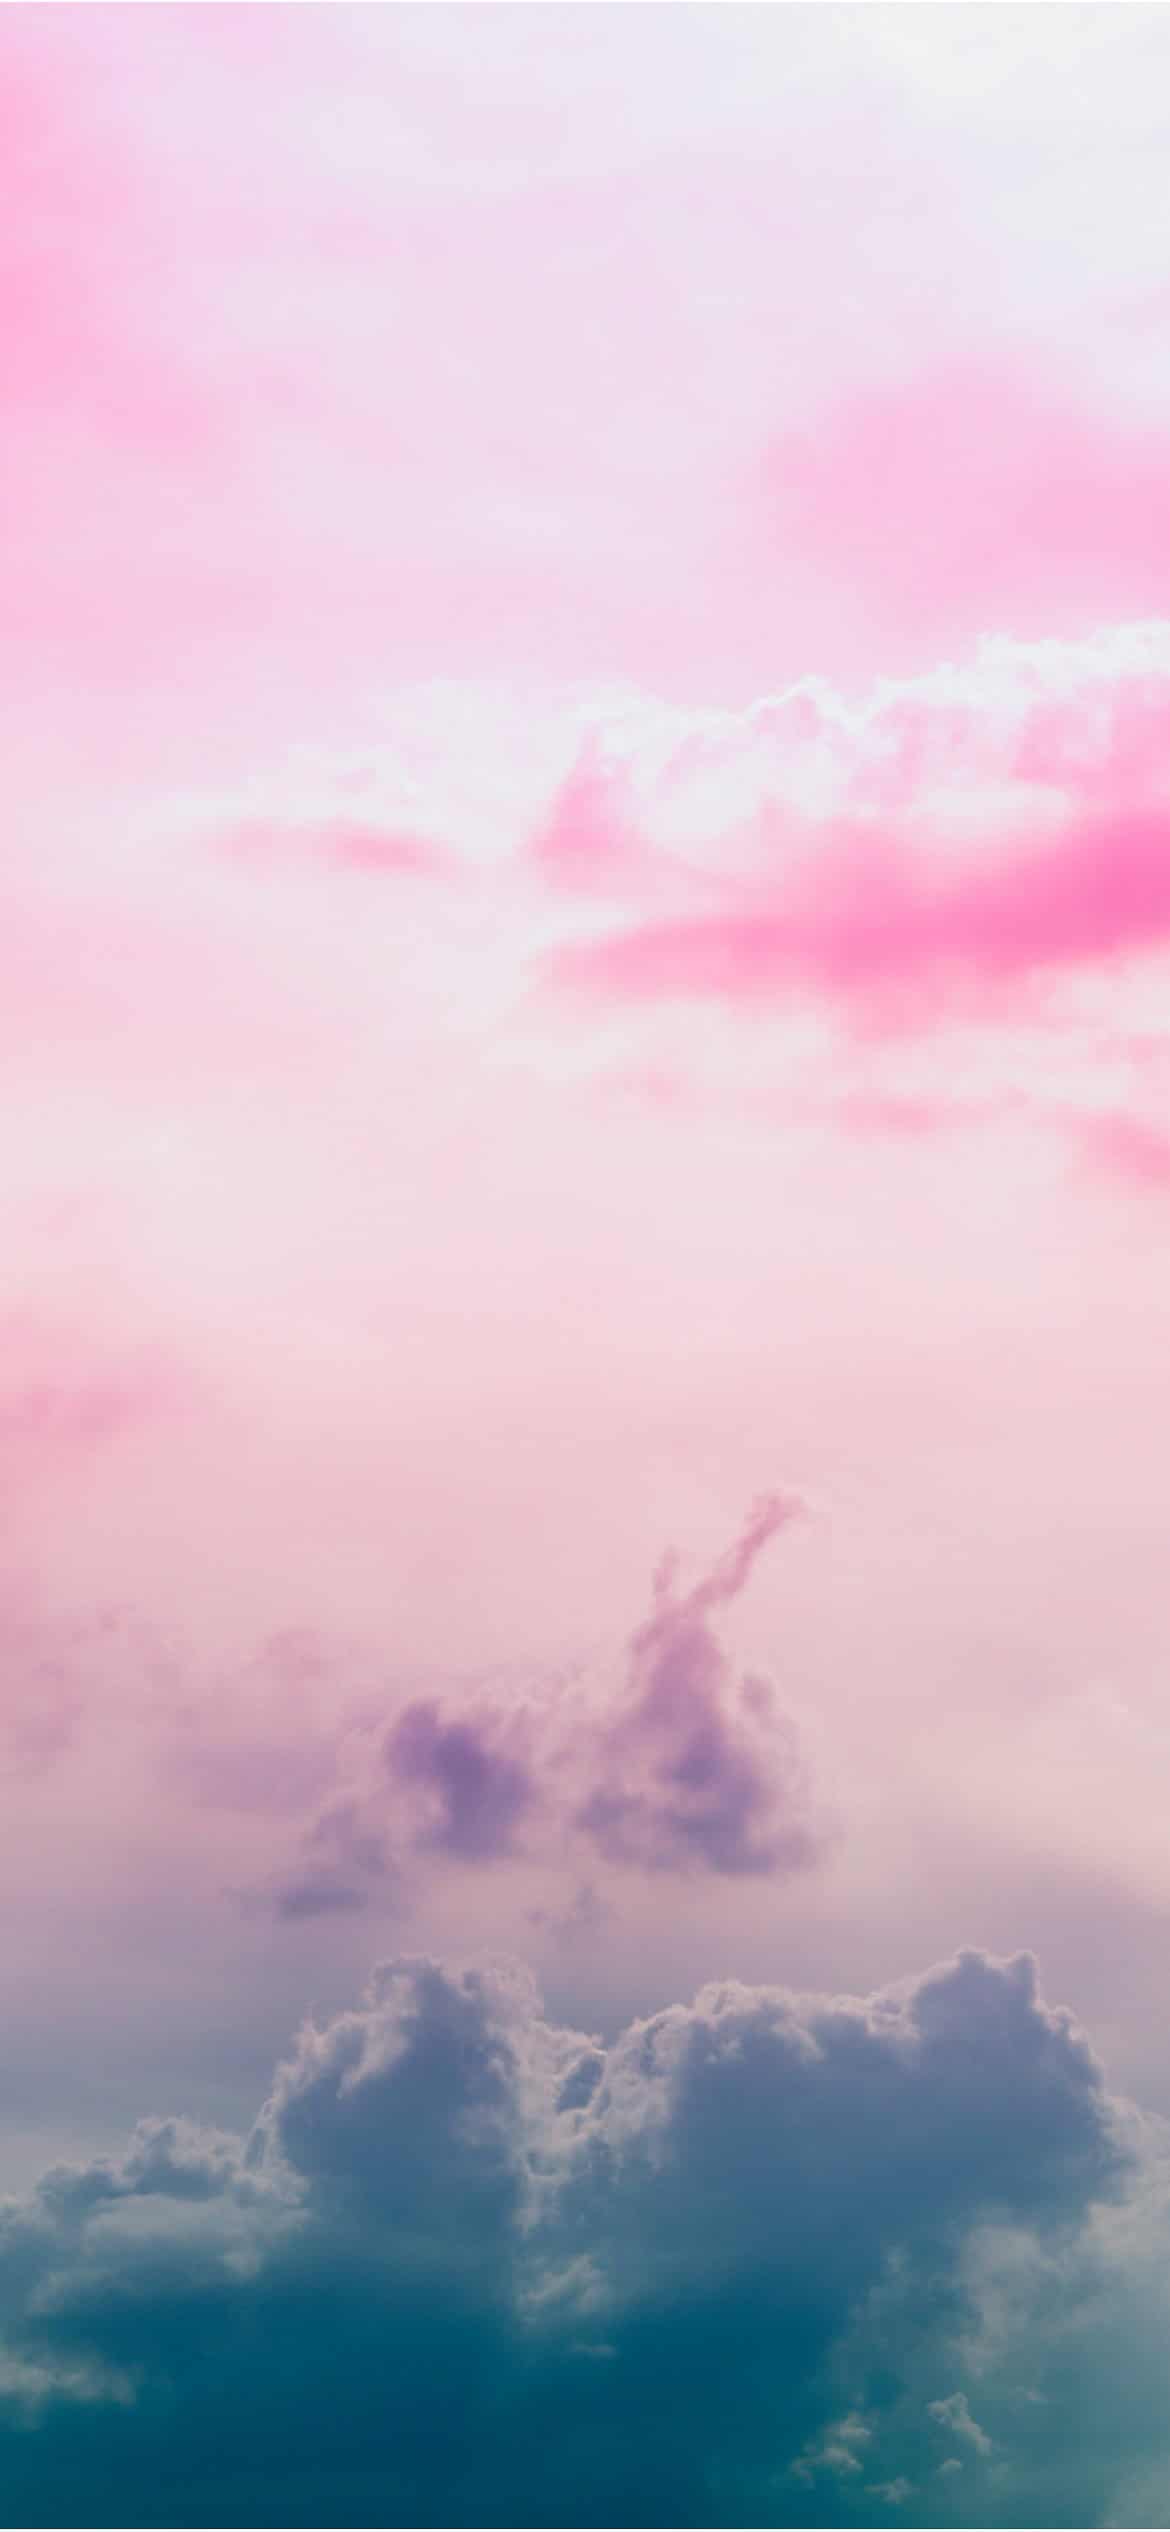 Pink Aesthetic Wallpaper Background You Need For Your Phone Right Now!